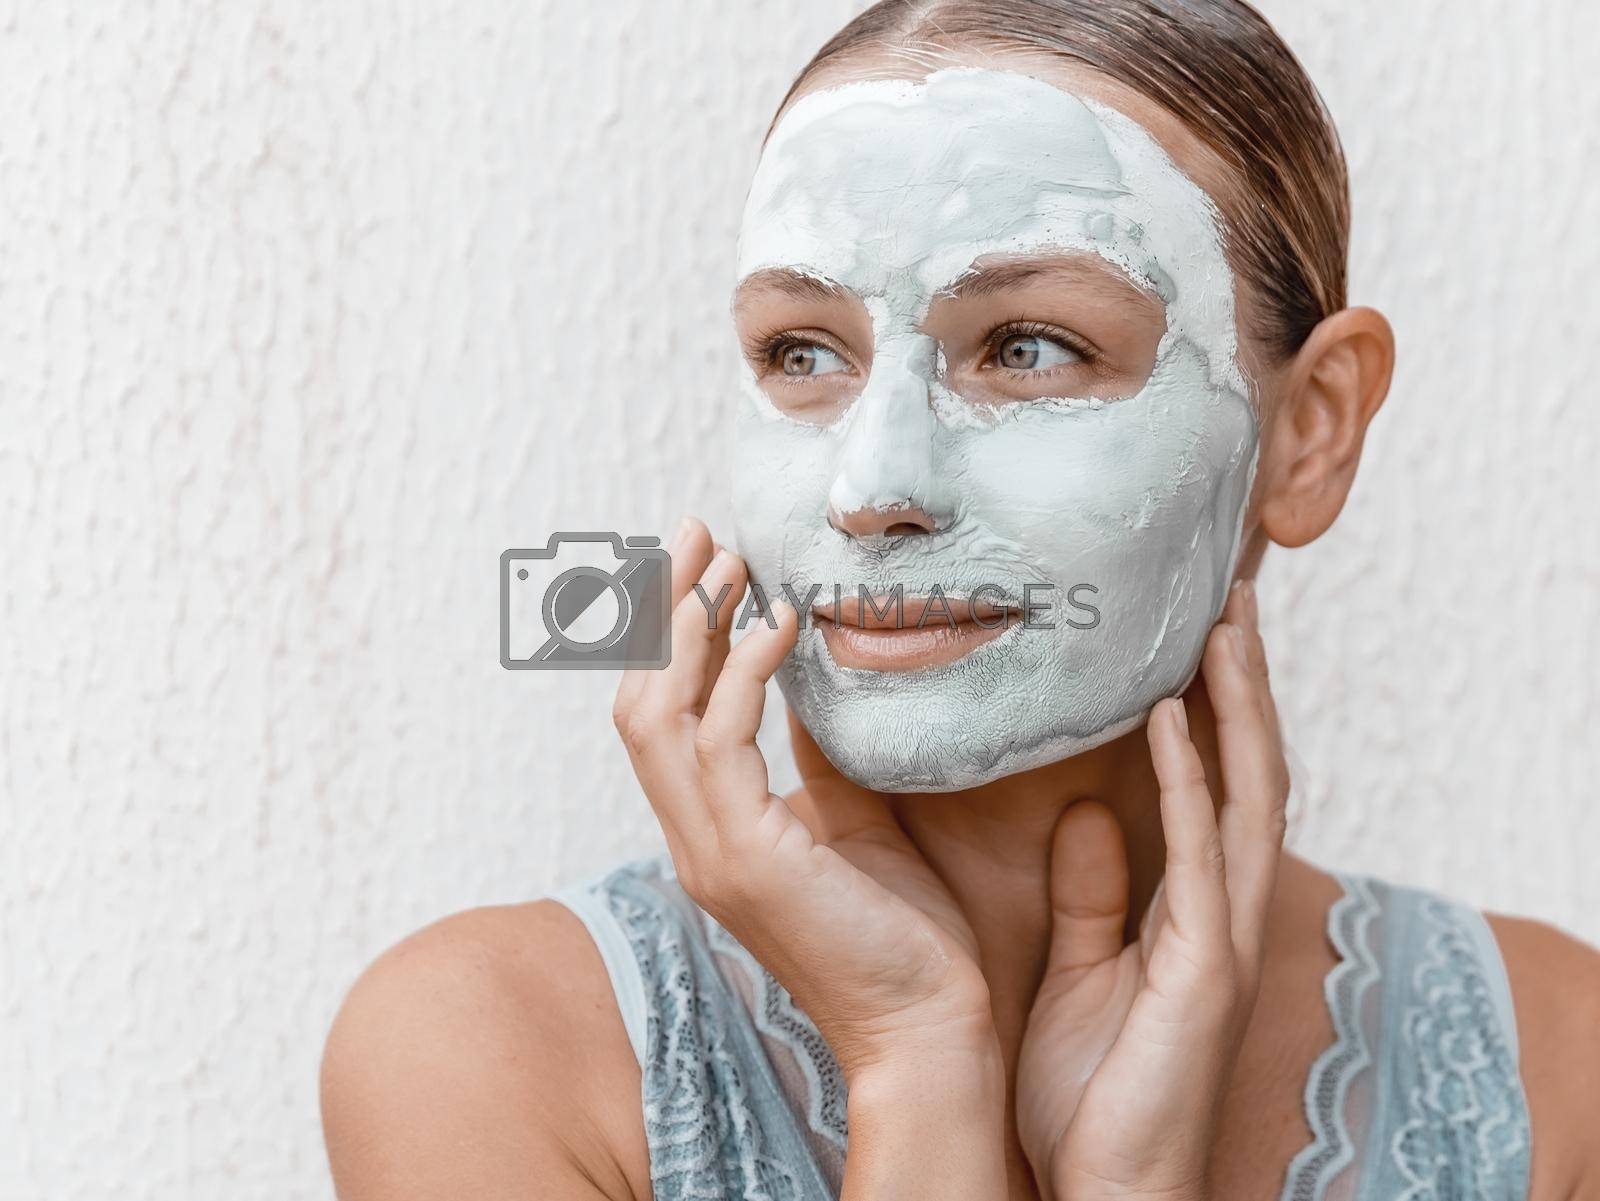 Royalty free image of Woman Applying Mud Clay by Anna_Omelchenko